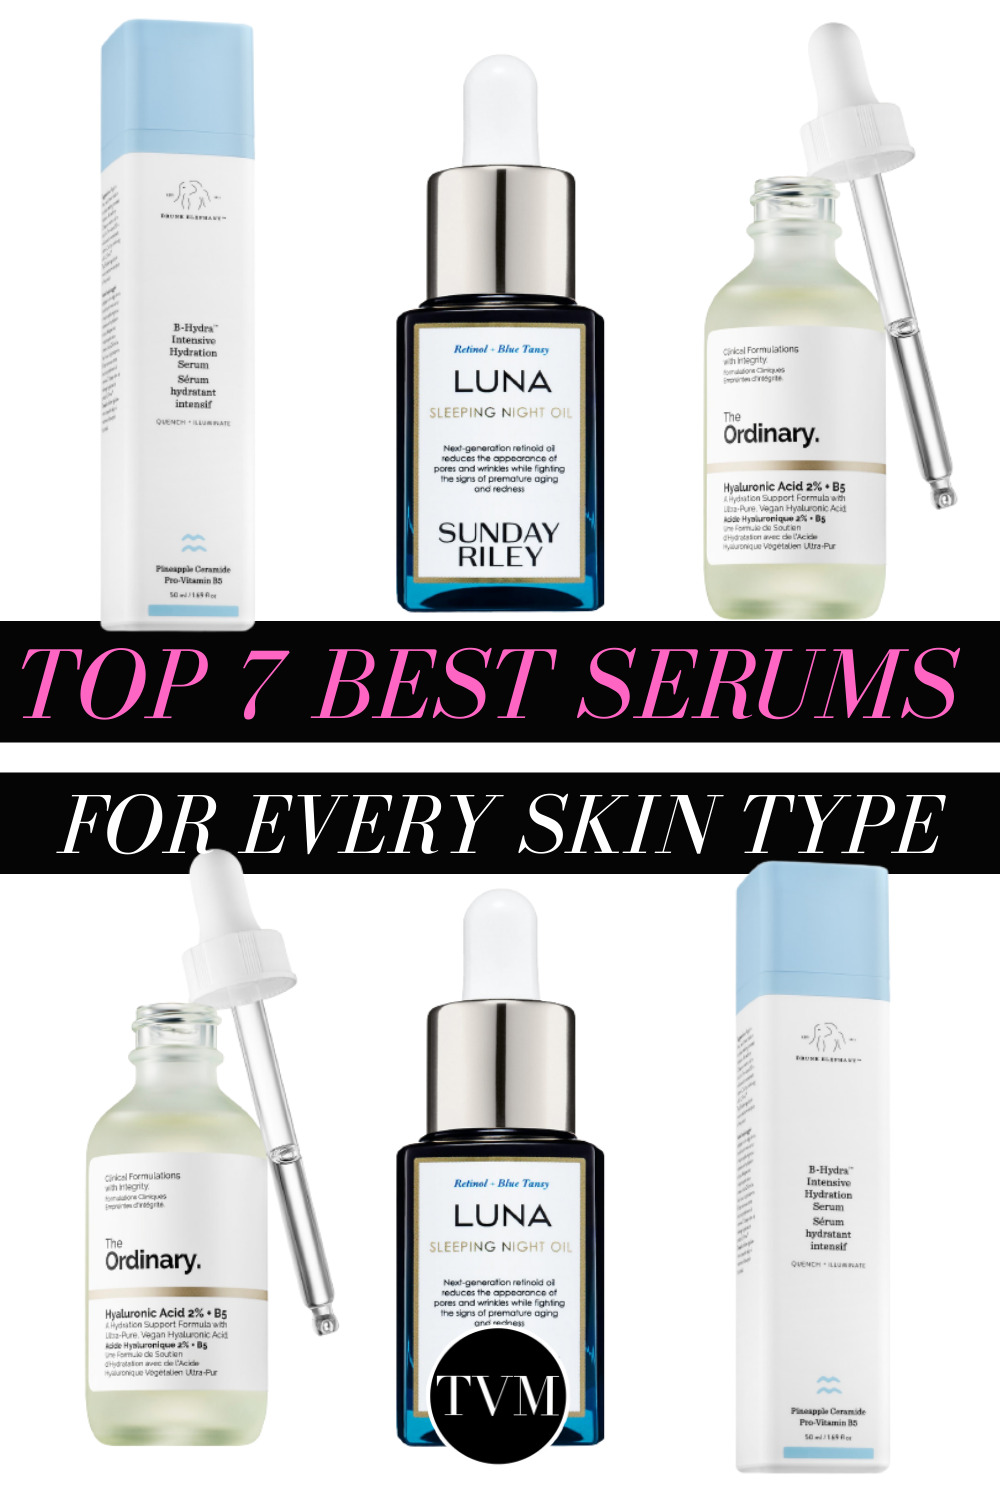 Serums can do wonders to your skin. Just but integrating some of these products, you can revolutionize your skincare game. Here you will find the -Top 7 best serums for every skin type! Some are anti-aging others are perfect for a hydration boost. You name it! Definitely, the selection you need to know!